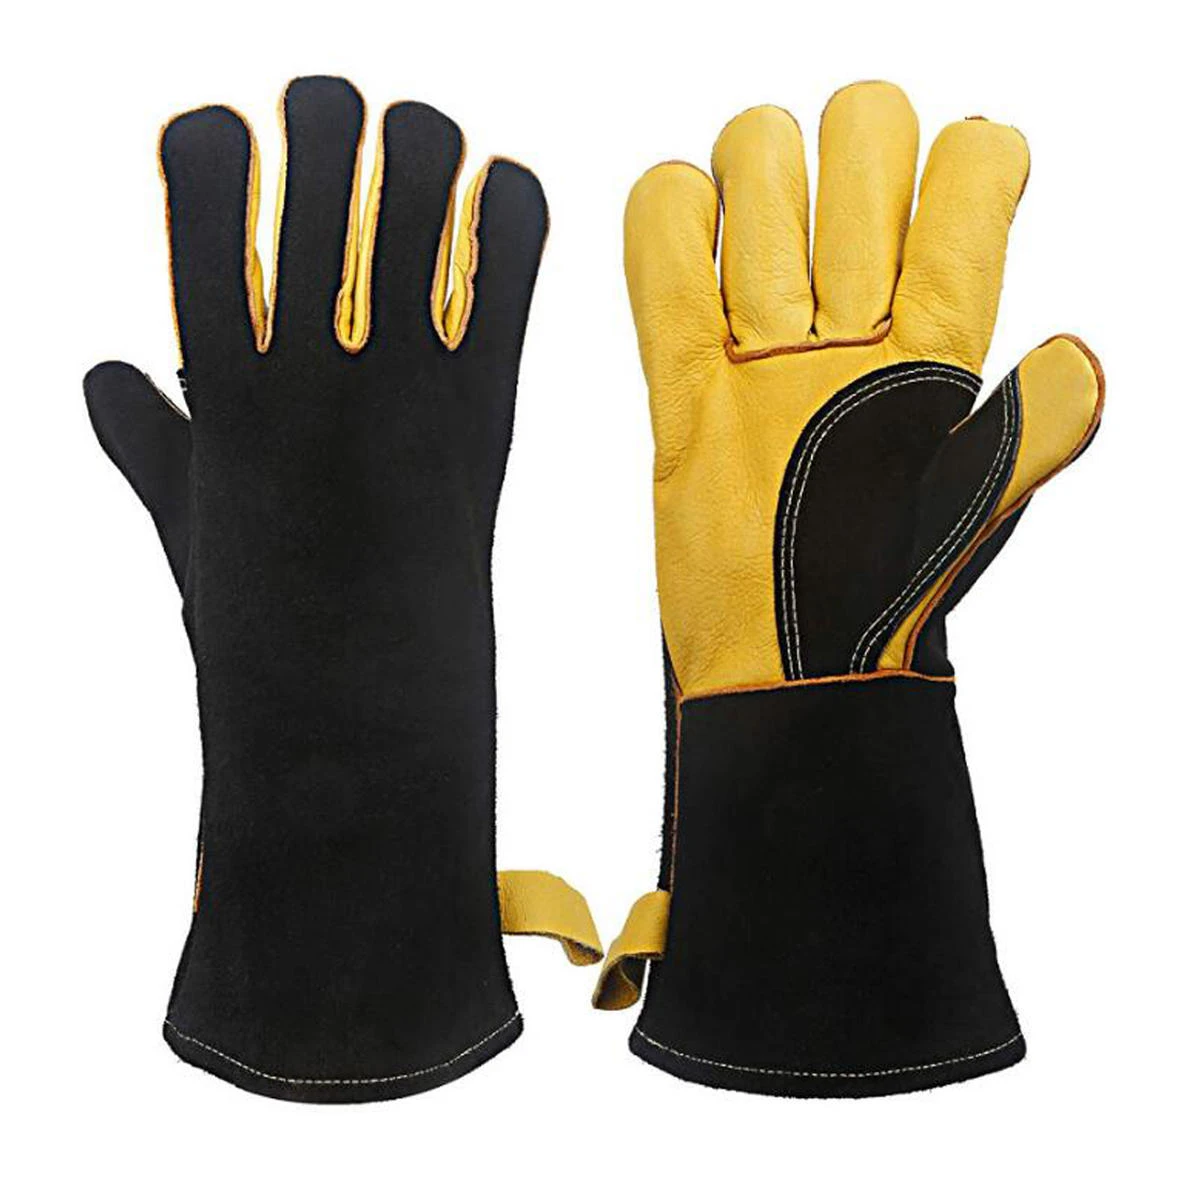 Leather labor gloves heavy duty outdoor protective garden gloves